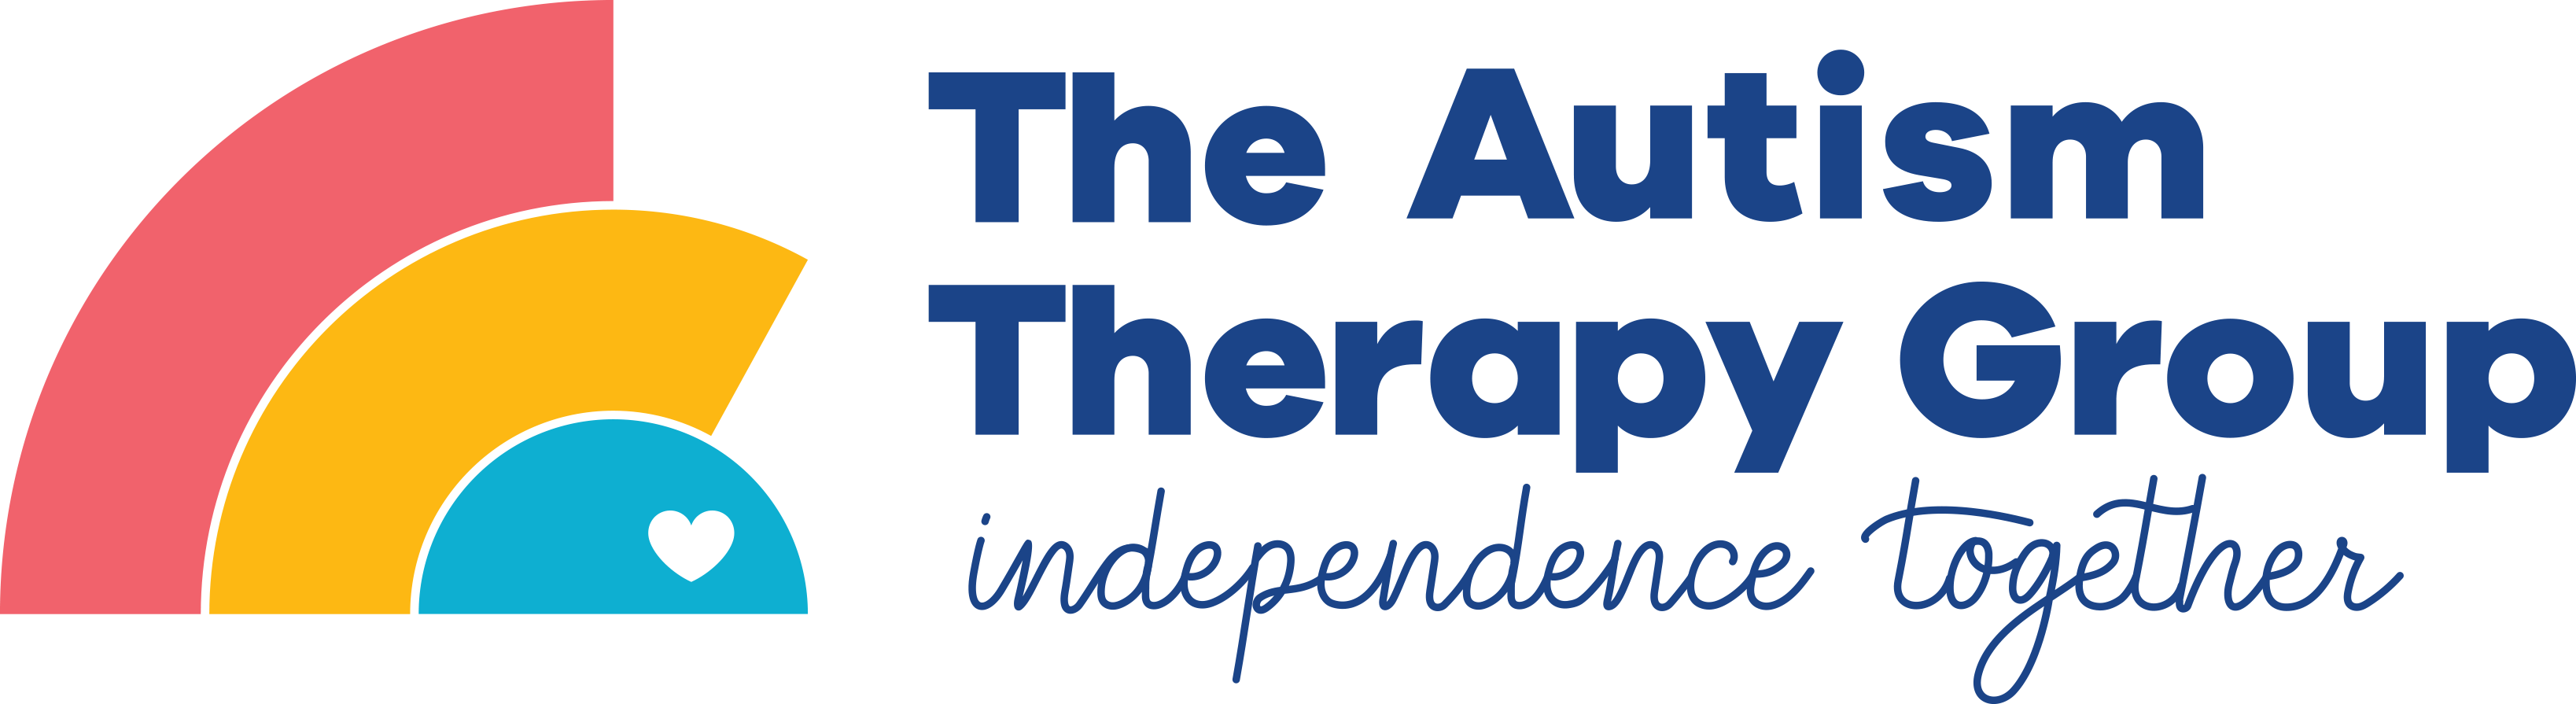 The Autism Therapy Group - ABA Therapy